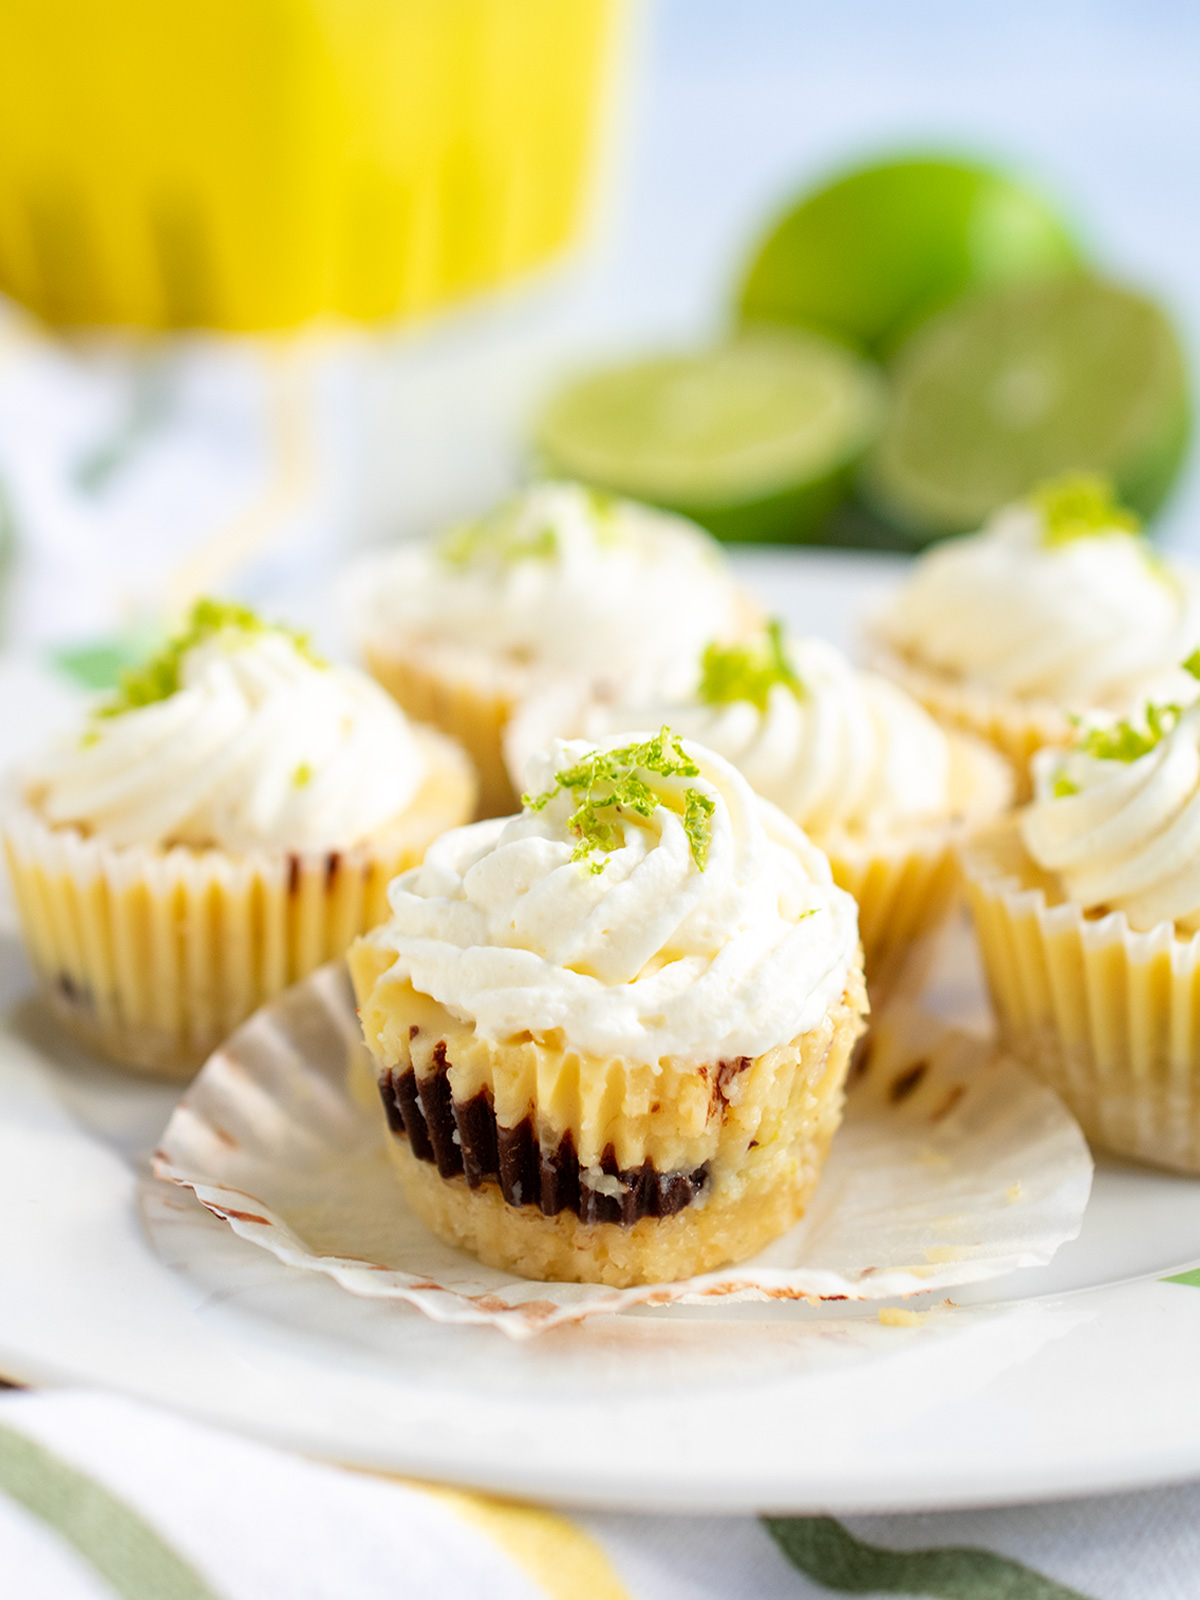 Close up side view of a mini key lime pie showing the chocolate layer.